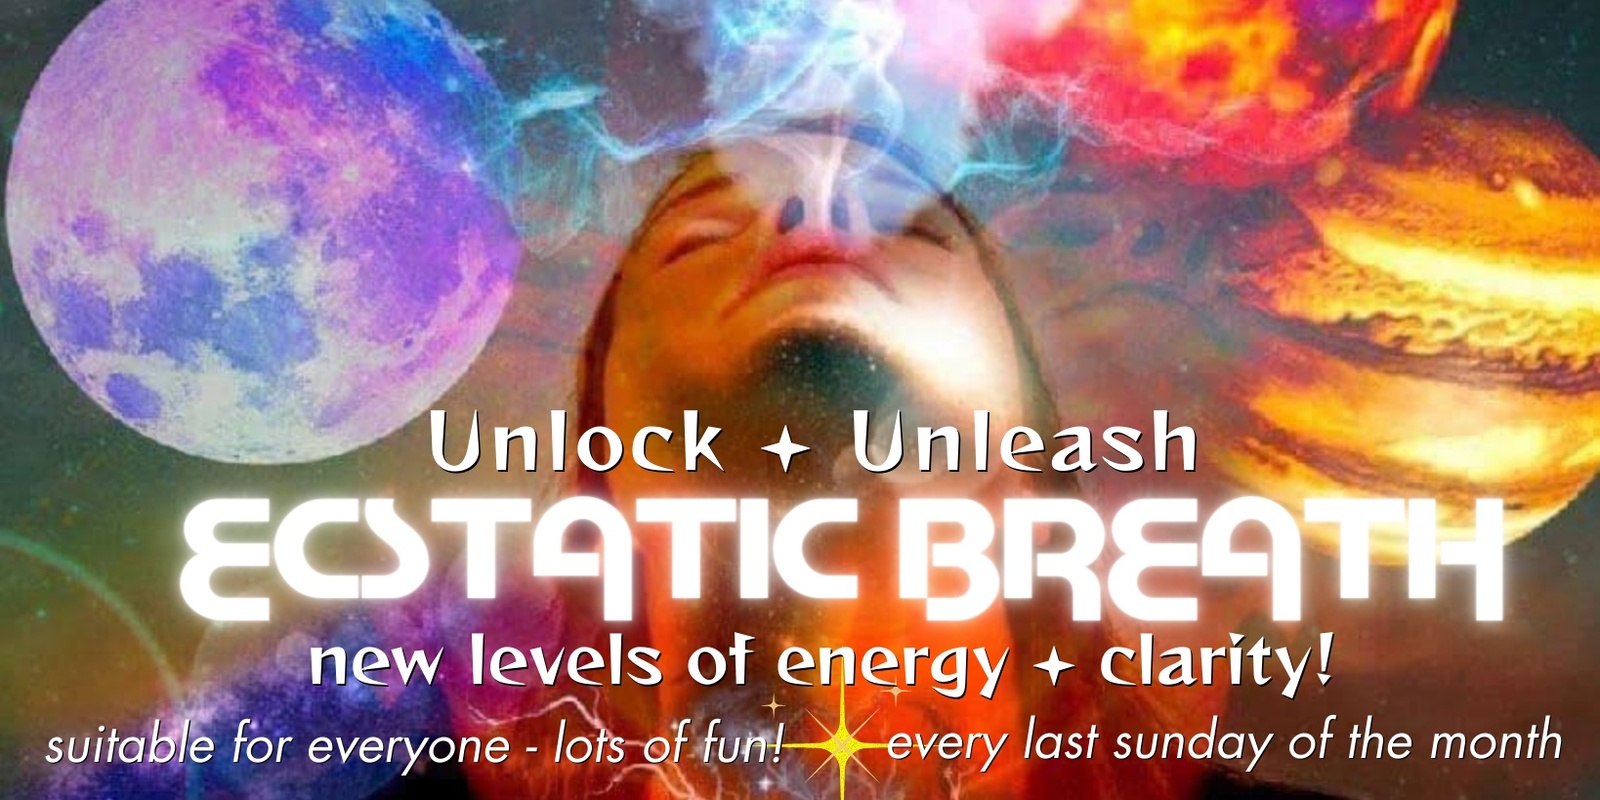 Banner image for 𝗕𝗿𝗲𝗮𝘁𝗵𝘄𝗼𝗿𝗸 ∙ 𝗘𝗰𝘀𝘁𝗮𝘁𝗶𝗰 𝗕𝗿𝗲𝗮𝘁𝗵𝘄𝗼𝗿𝗸 ∙ Unlock + Unleash New Levels of Energy + Clarity